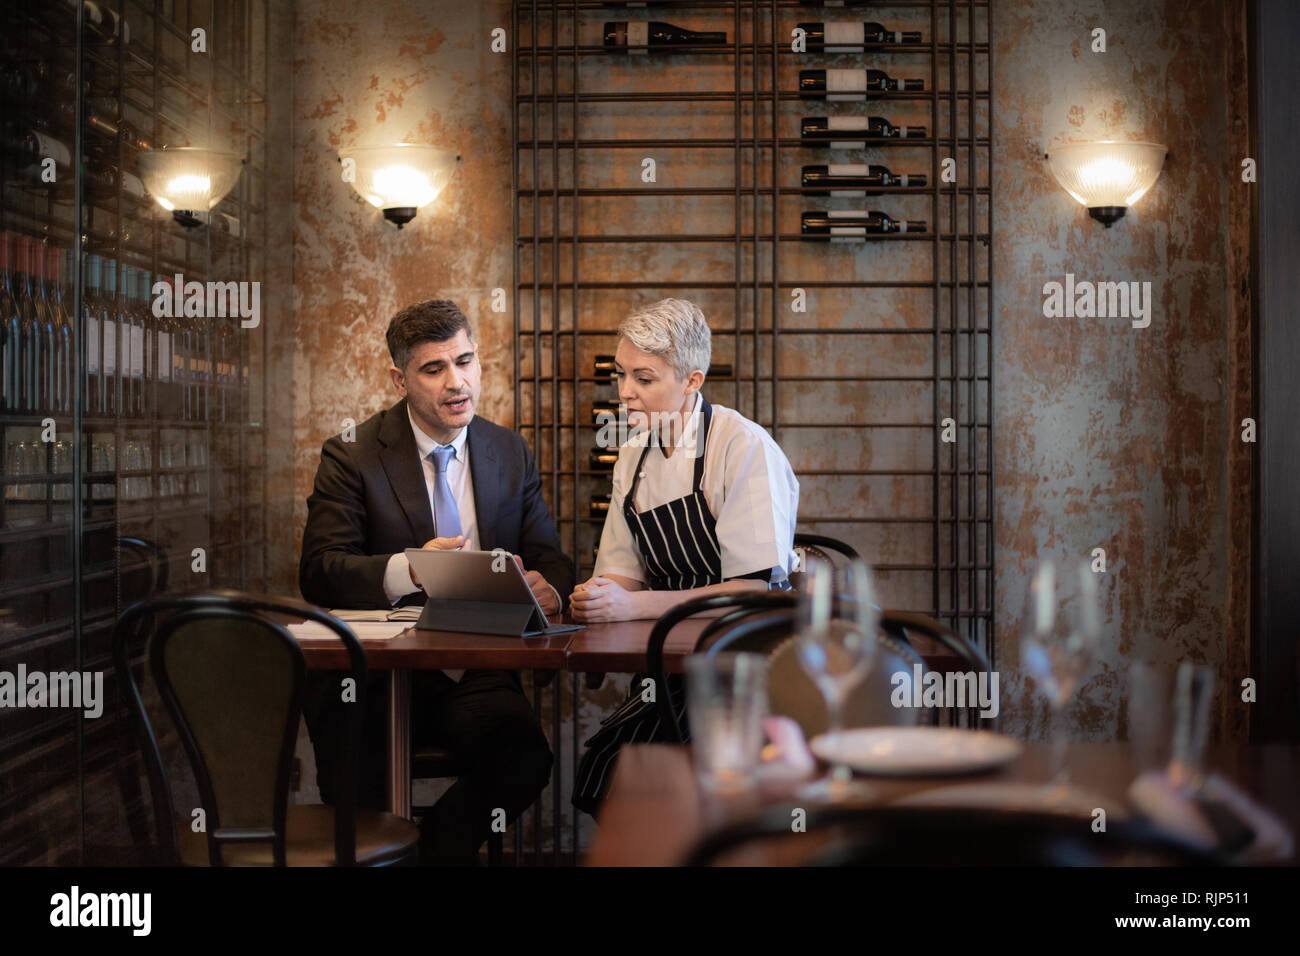 Chef and restaurant owner talking with financial advisor investor Stock Photo